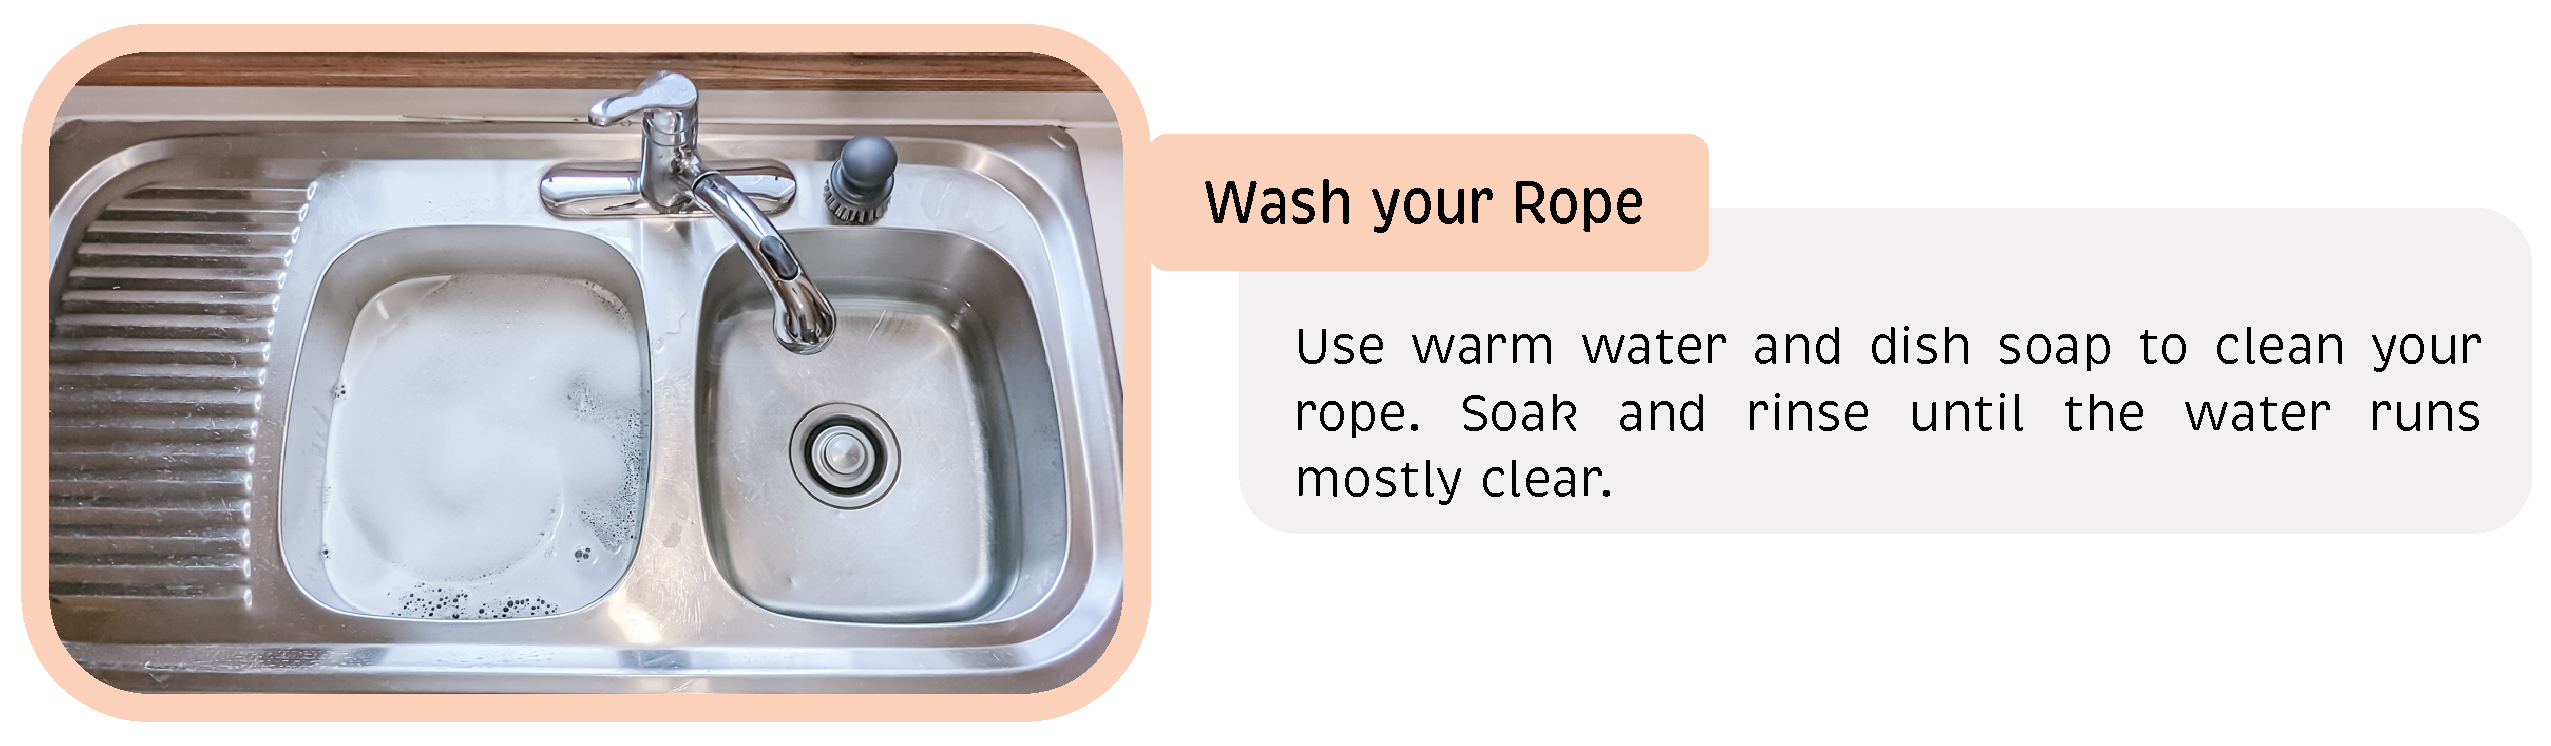 Wash Your Rope